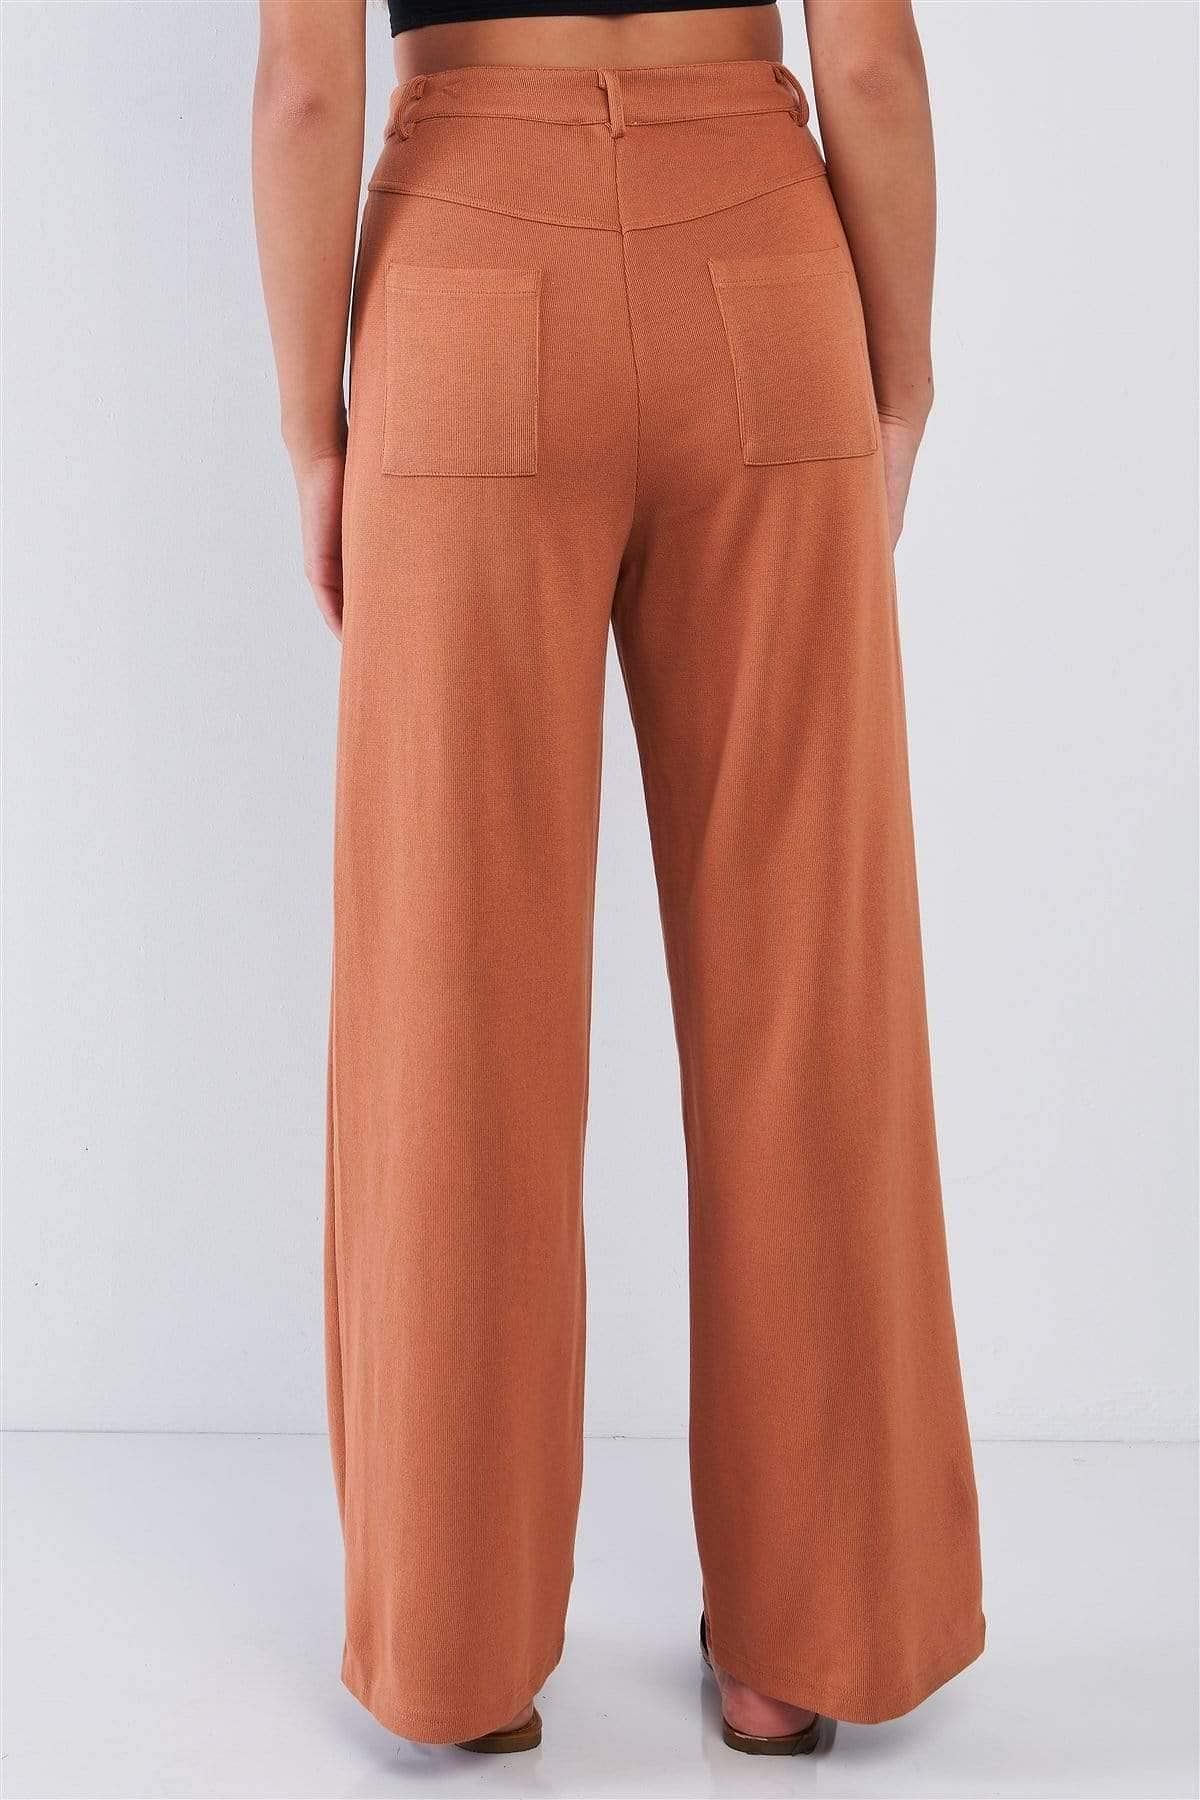 Orange High Waisted Wide Leg Pants - Shopping Therapy, LLC 